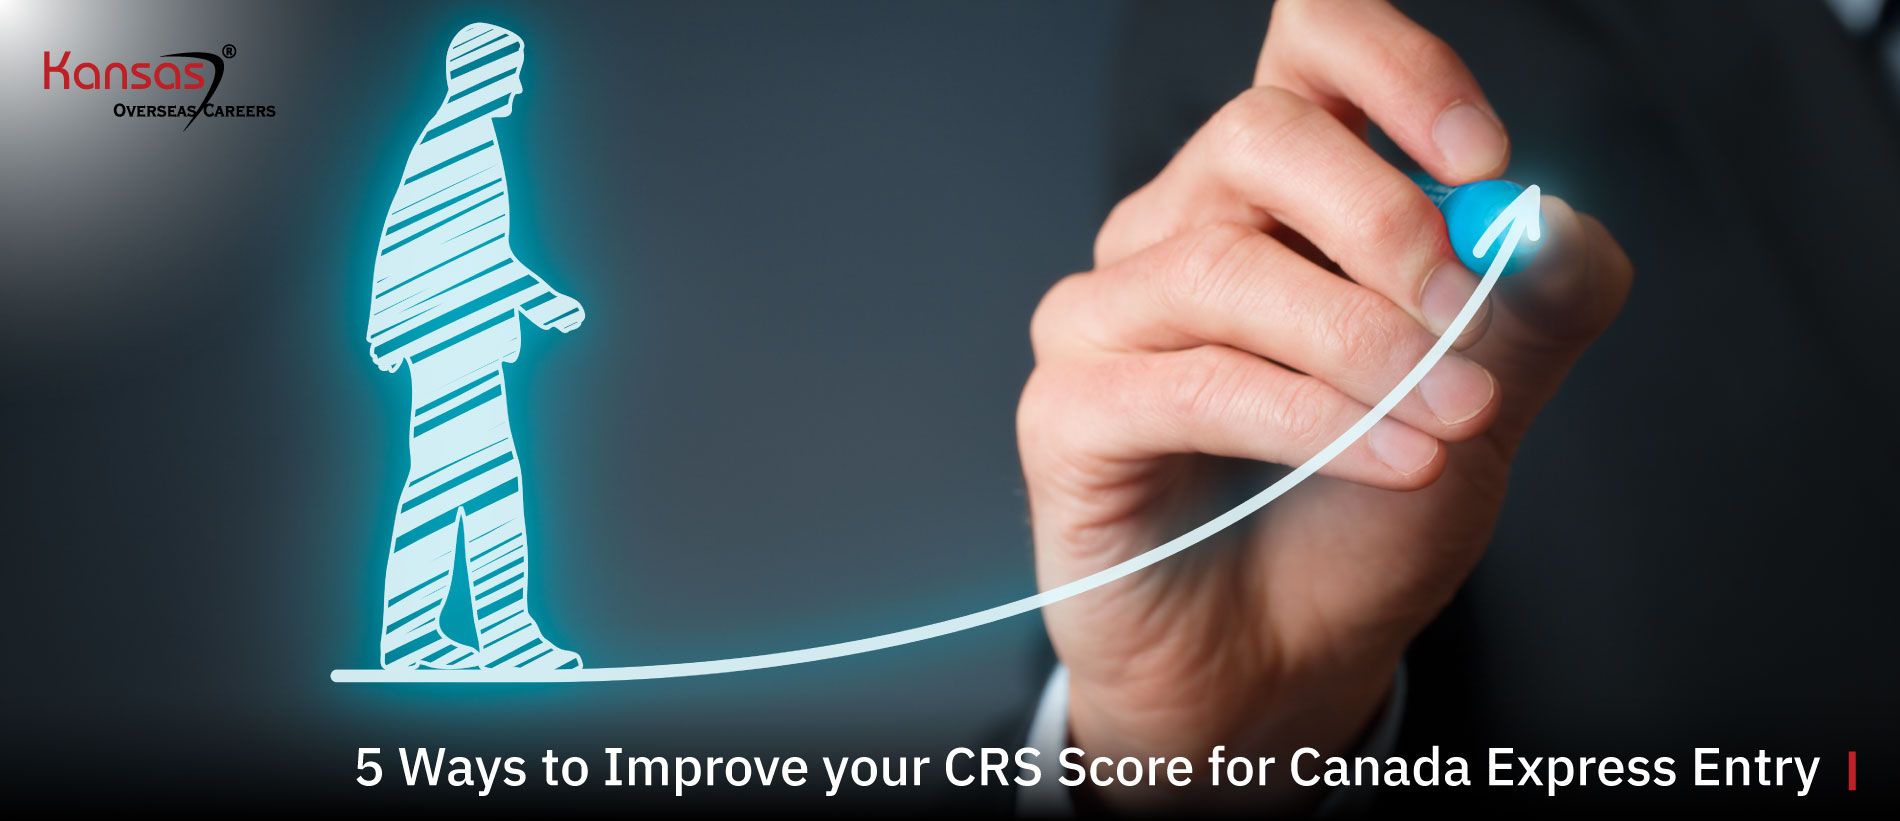 5-Ways-to-Improve-your-CRS-Score-for-Canada-Express-Entry-